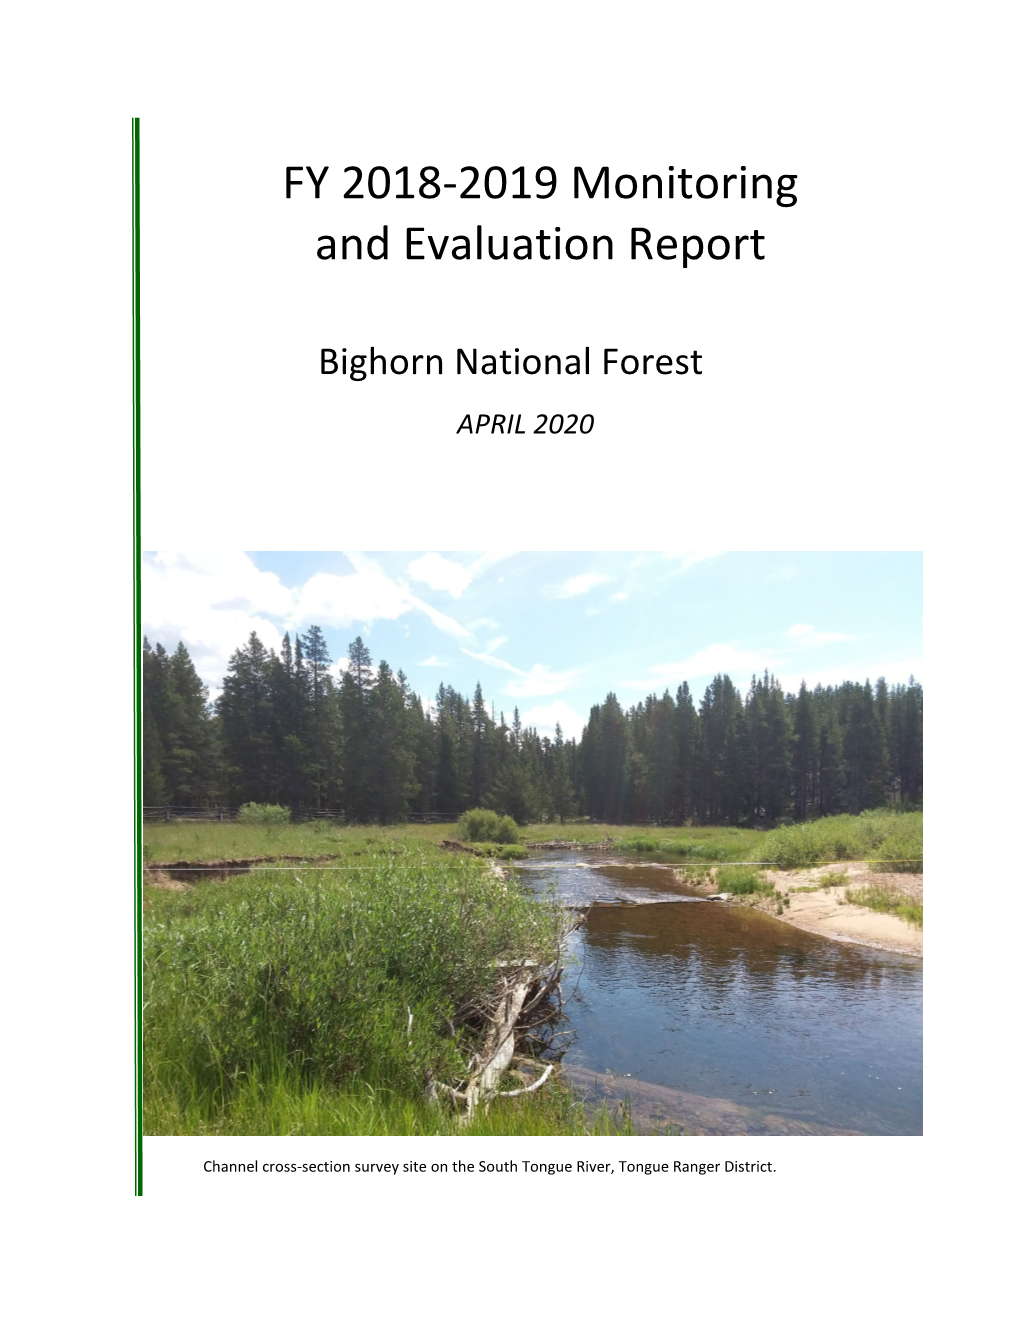 FY 2018-2019 Monitoring and Evaluation Report